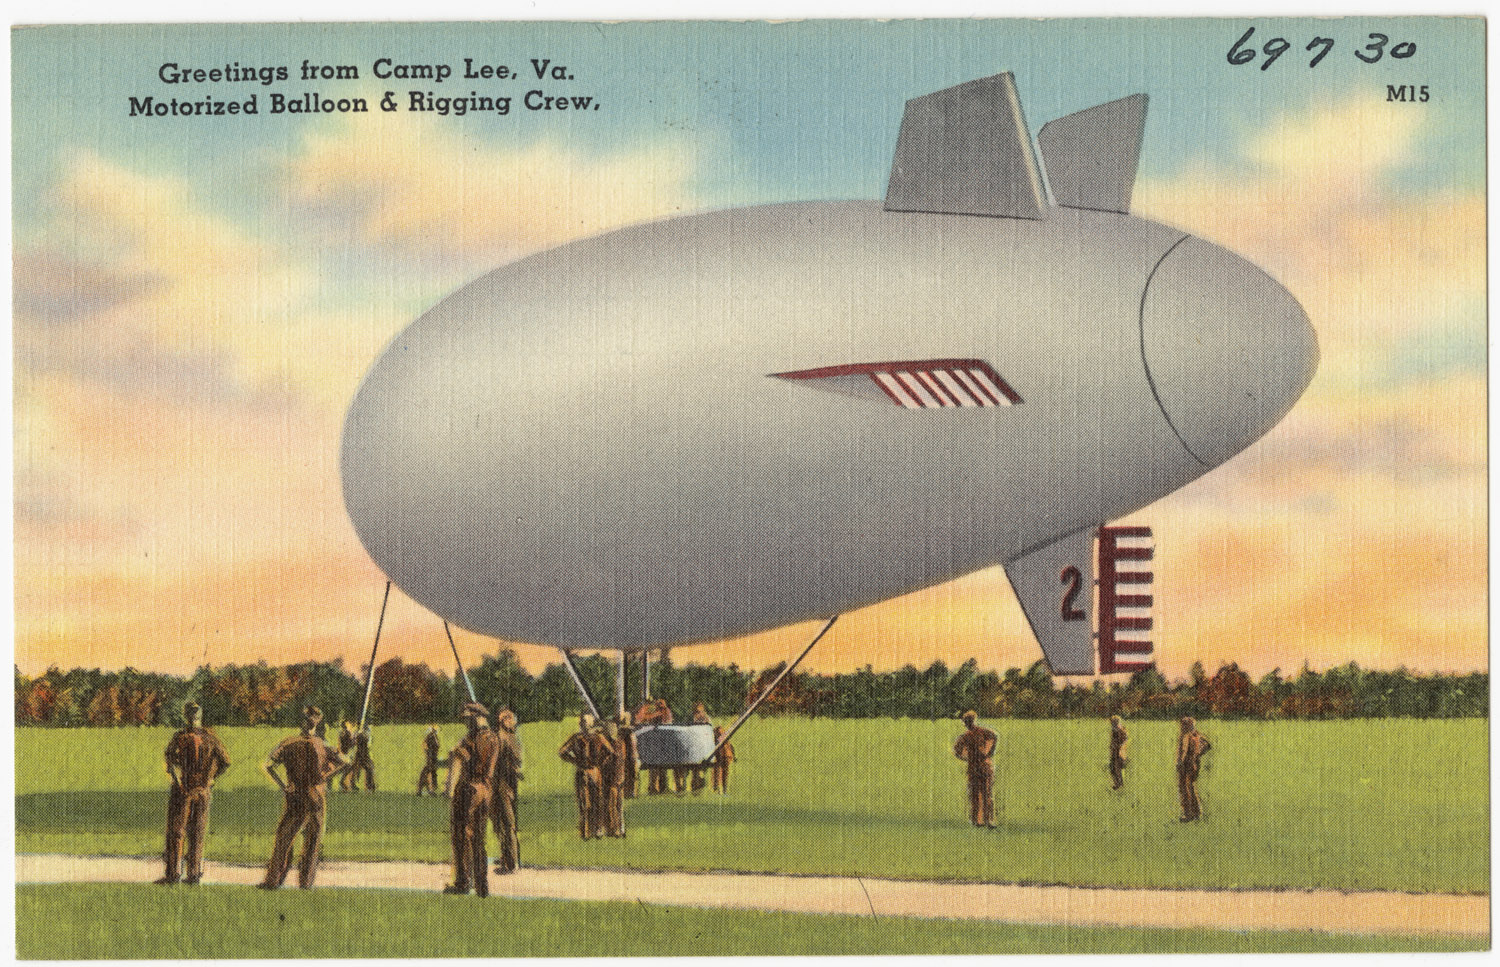 an older vintage postcard depicting a giant, white - colored, flying ship